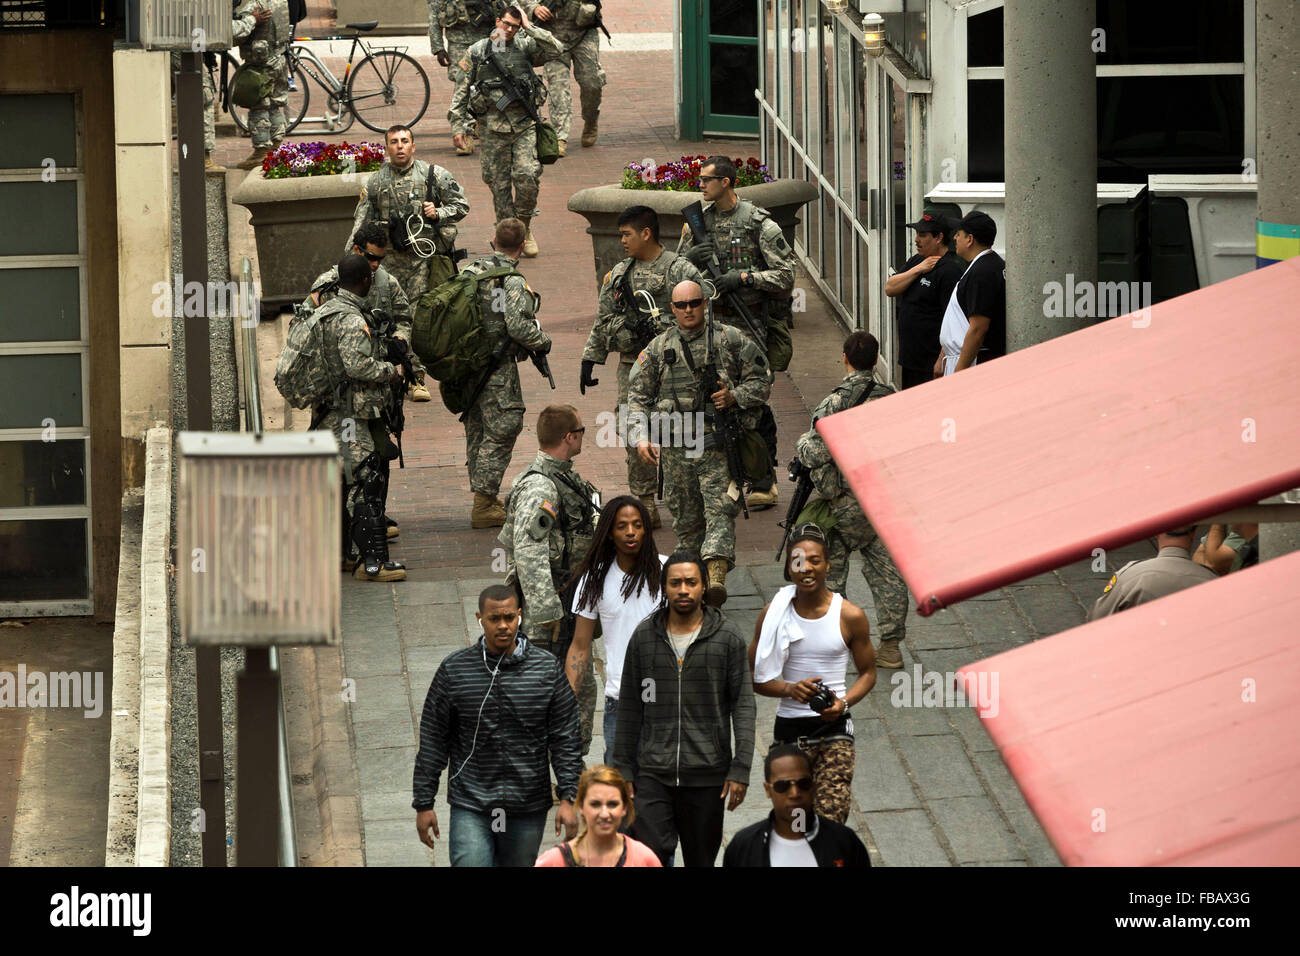 Heavily armed National Guard troopers patrol in Baltimores' inner harbor, April 30, 2015.   photo: Trevor Collens Stock Photo